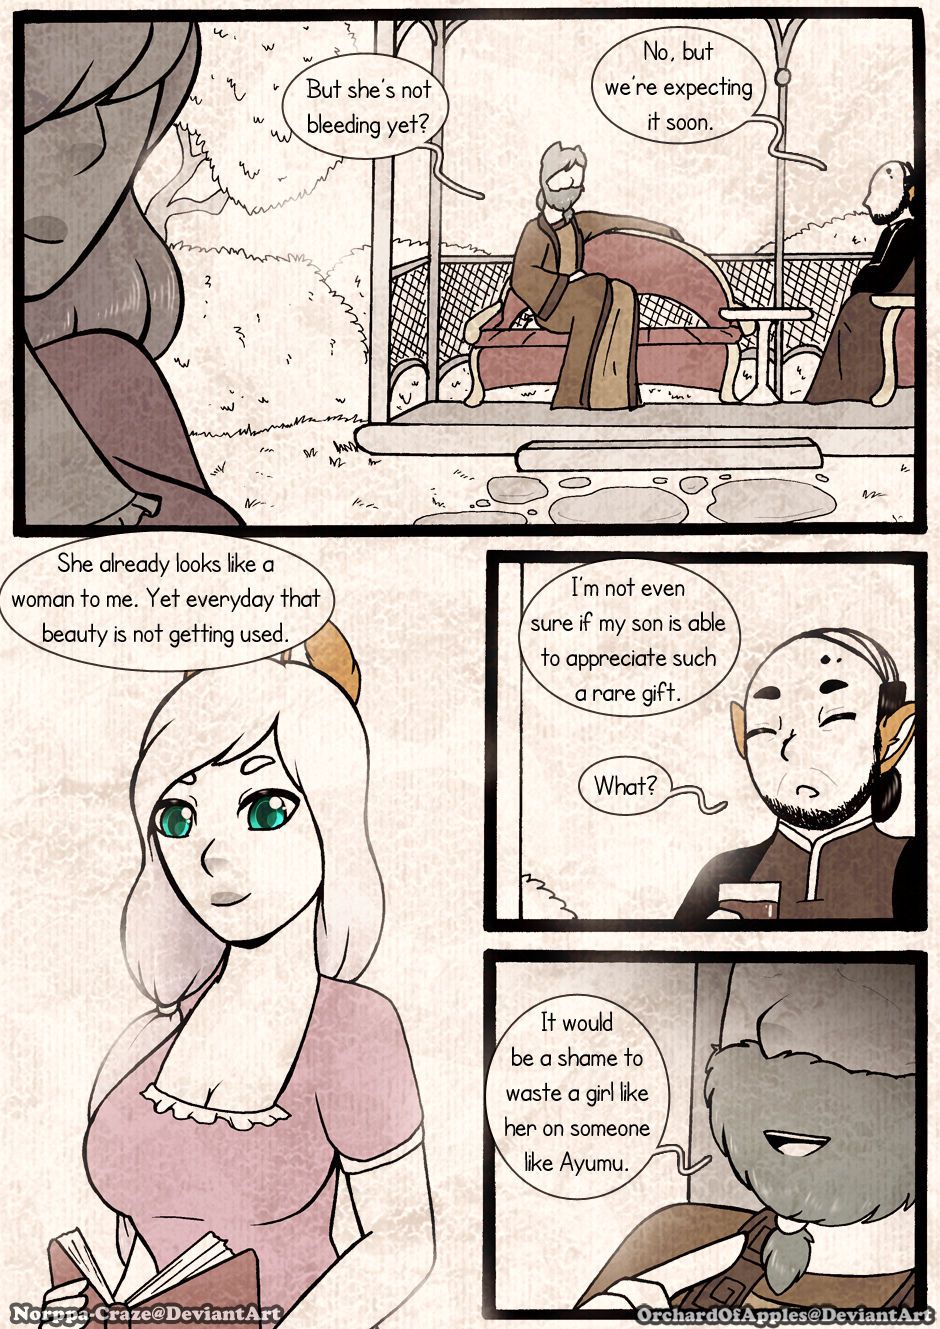 [Jeny-jen94] Between Kings and Queens [Ongoing] 292